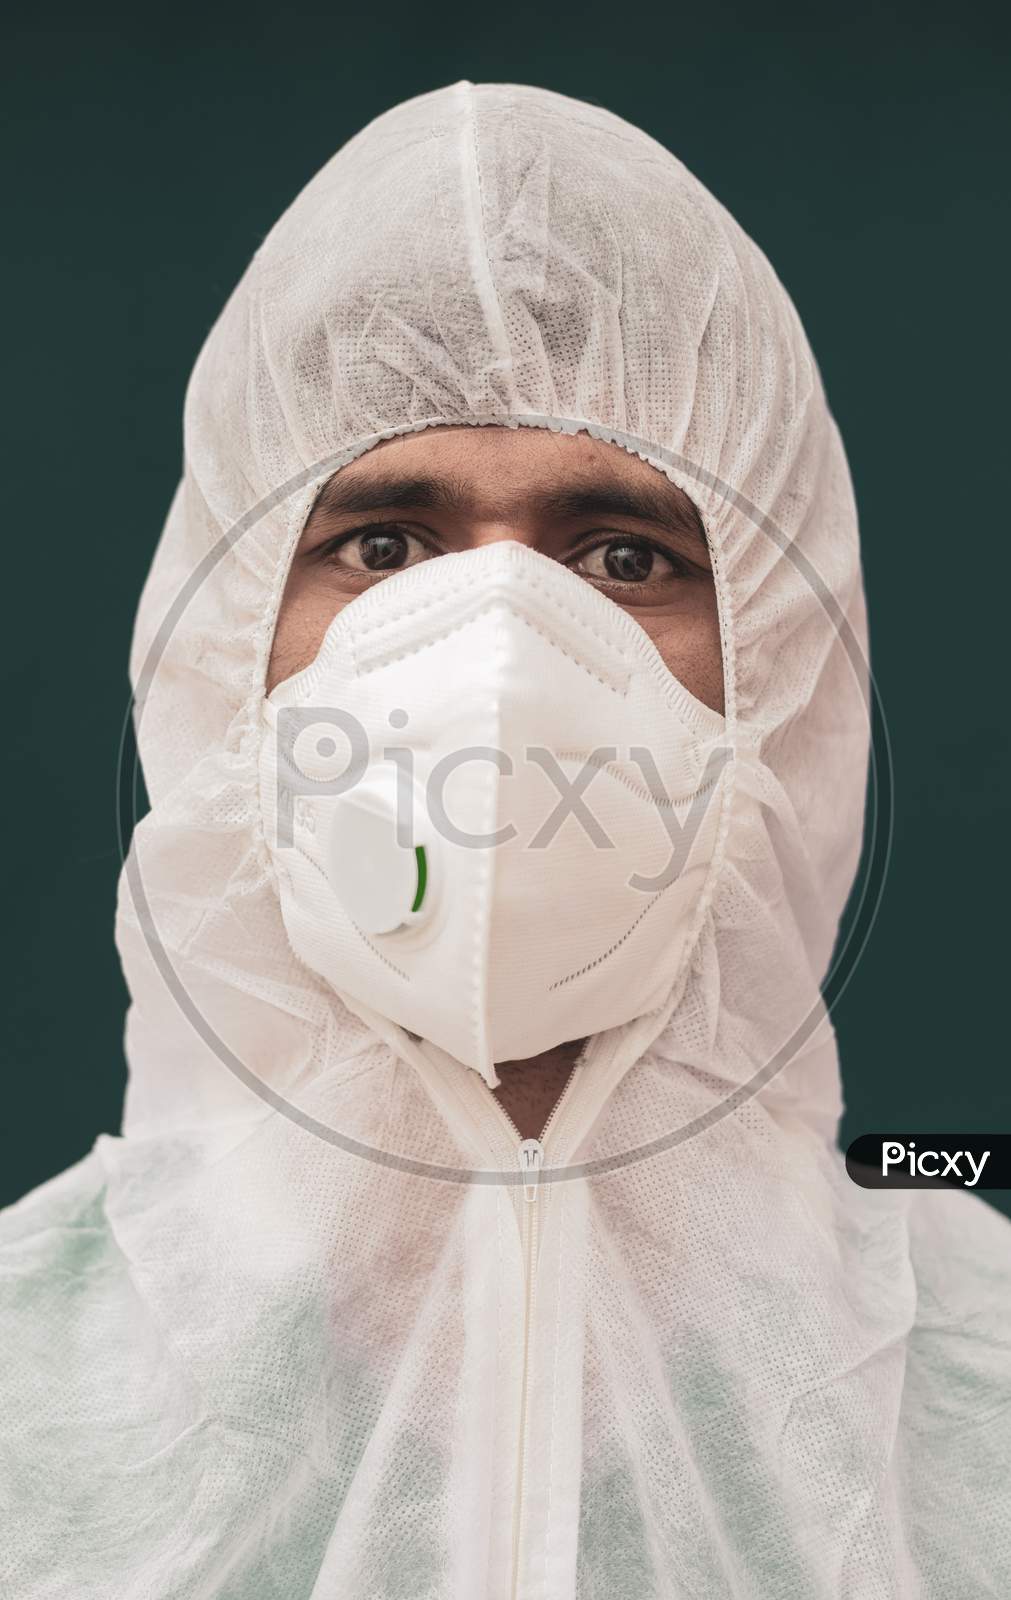 Close Up Portrait Of Doctor With Protective Suite And Medical N95 Face Mask Looking At Camera - Concept Of Doctors At Coronavirus Or Covid 19 Screening Process.